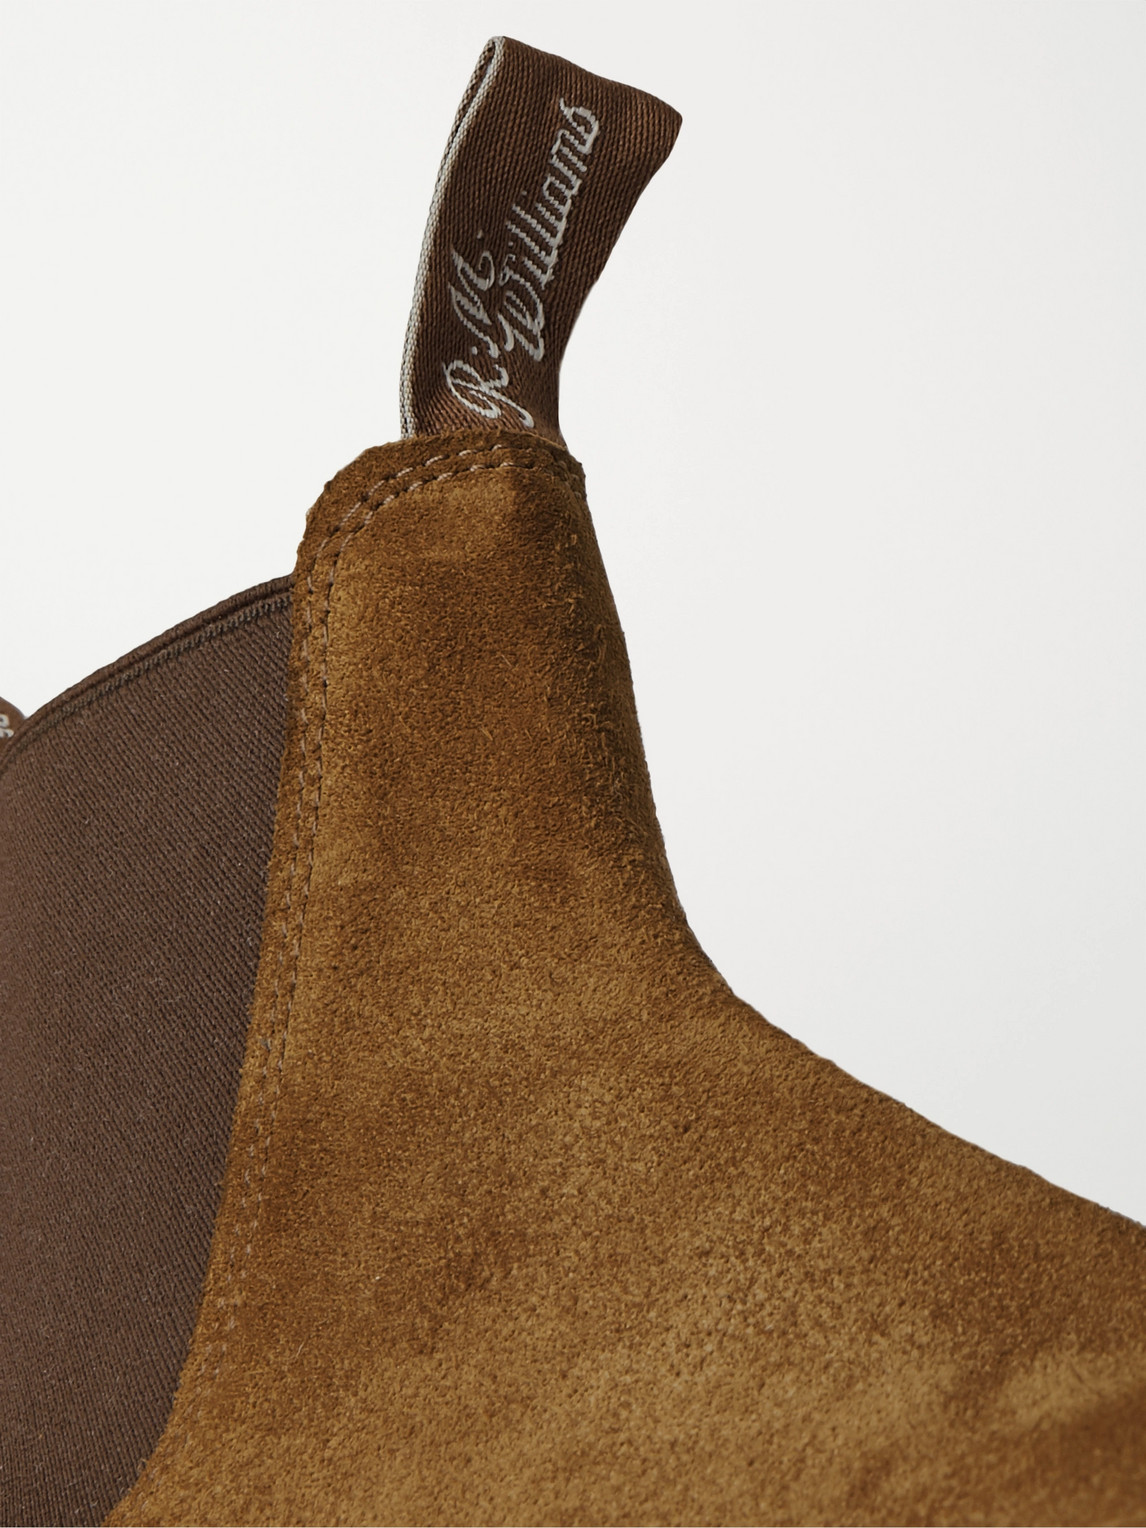 Shop R.m.williams Comfort Craftsman Suede Chelsea Boots In Brown